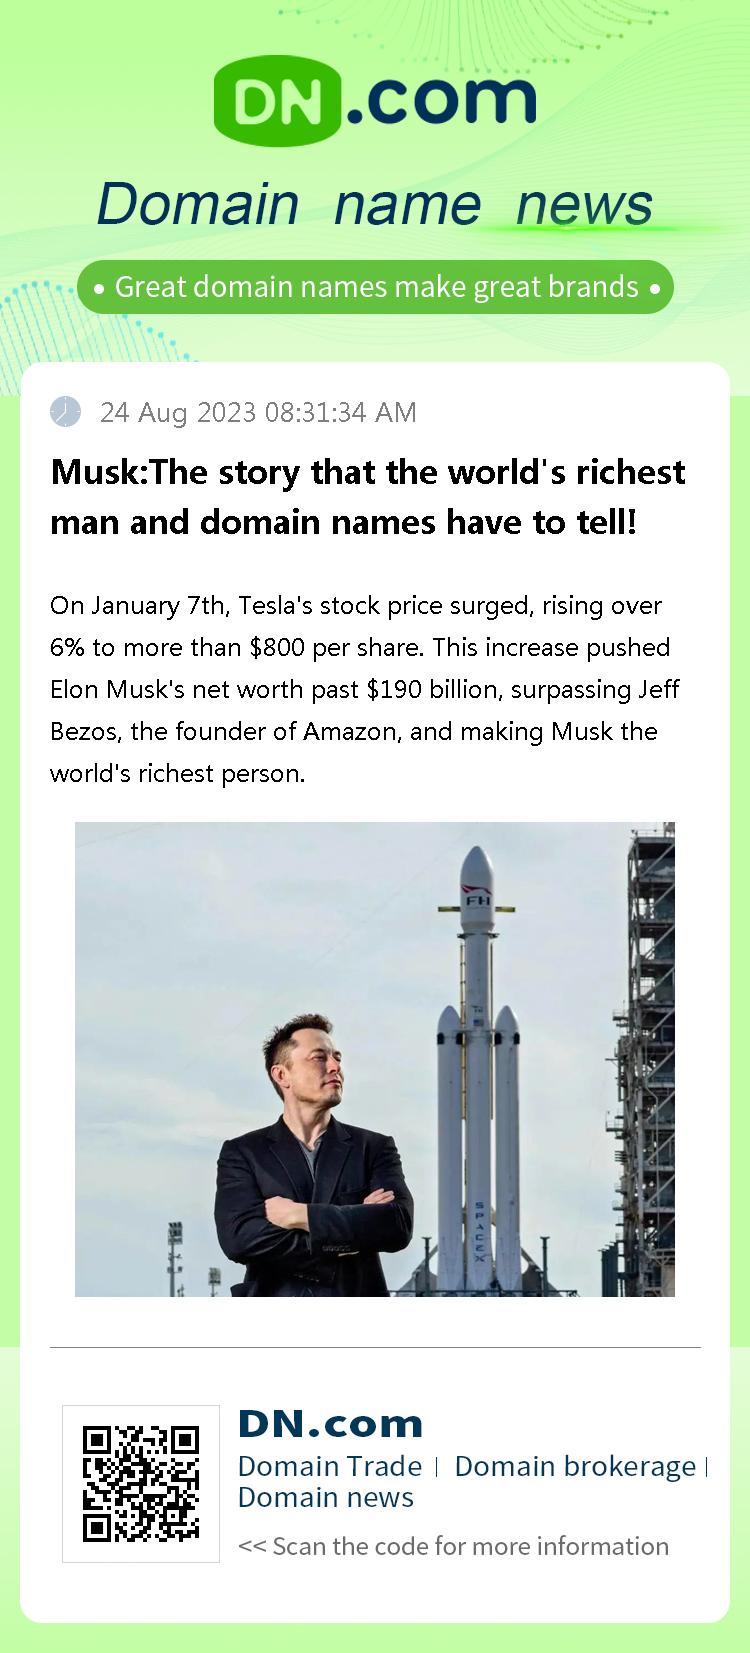 Musk:The story that the world's richest man and domain names have to tell!